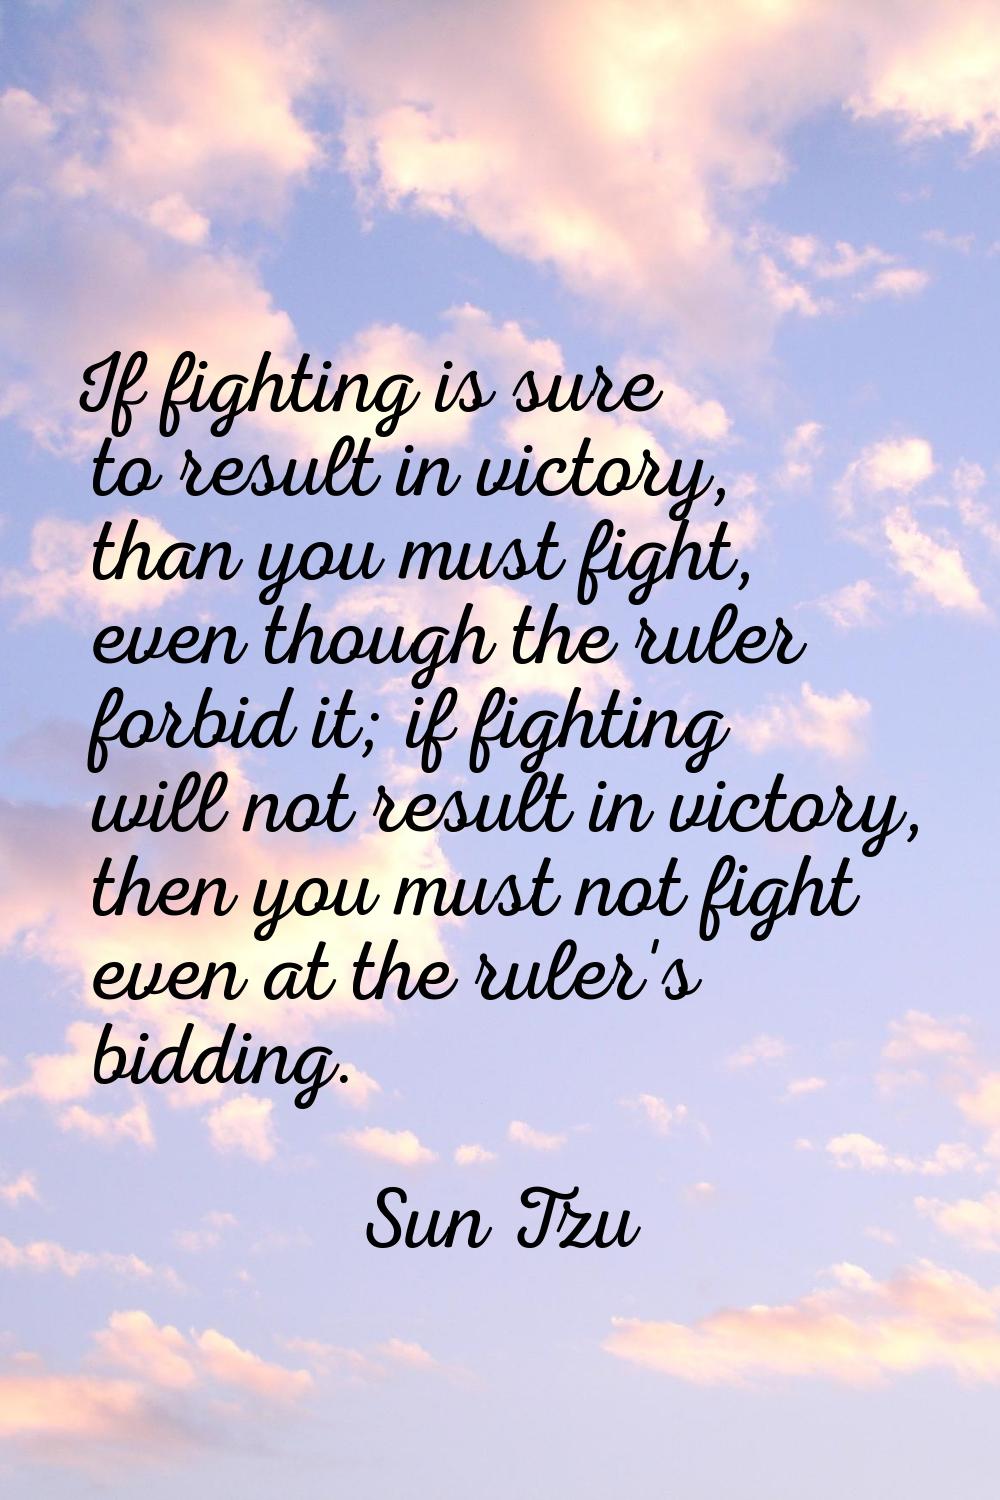 If fighting is sure to result in victory, than you must fight, even though the ruler forbid it; if 